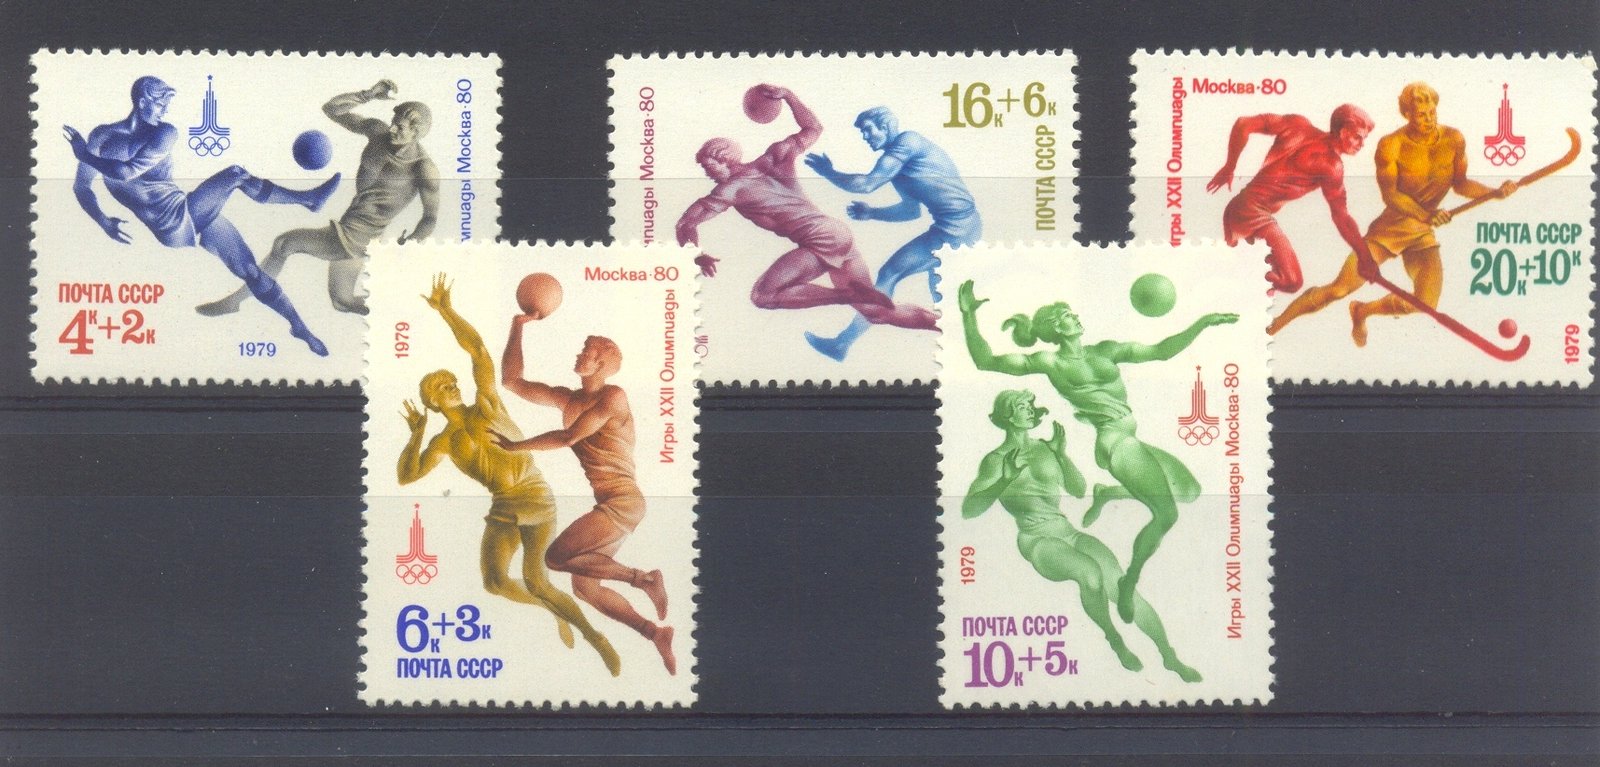 Russia 1979, Olympic Games, Sports, Football, Hockey, S.G. 4896-4900, Set of 5, Cat ₤ 2.60